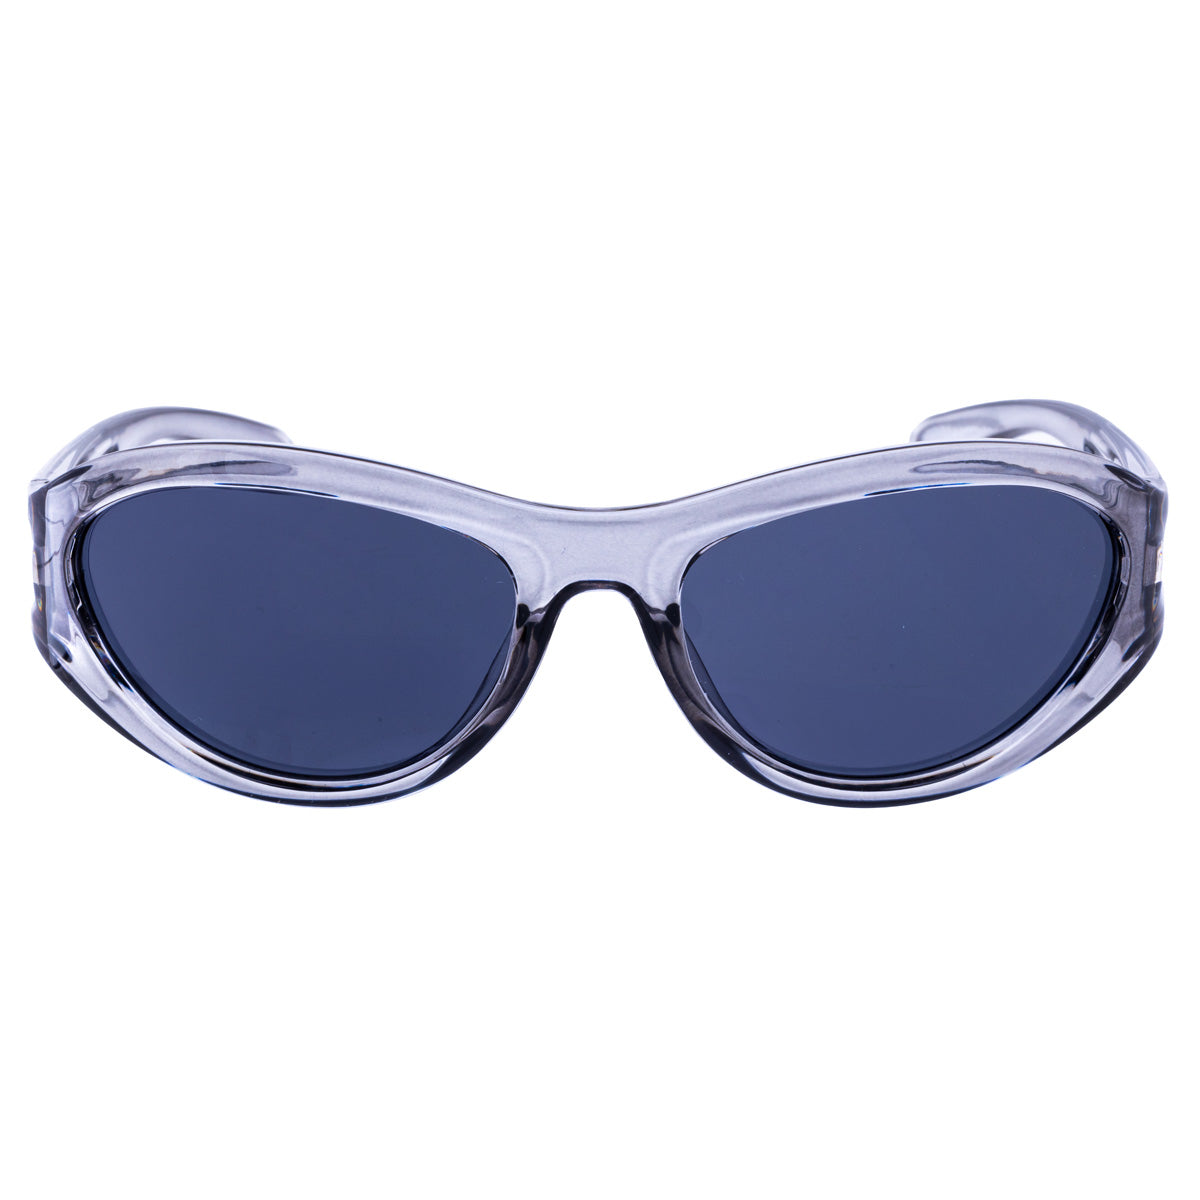 Sporty sunglasses curved sports glasses